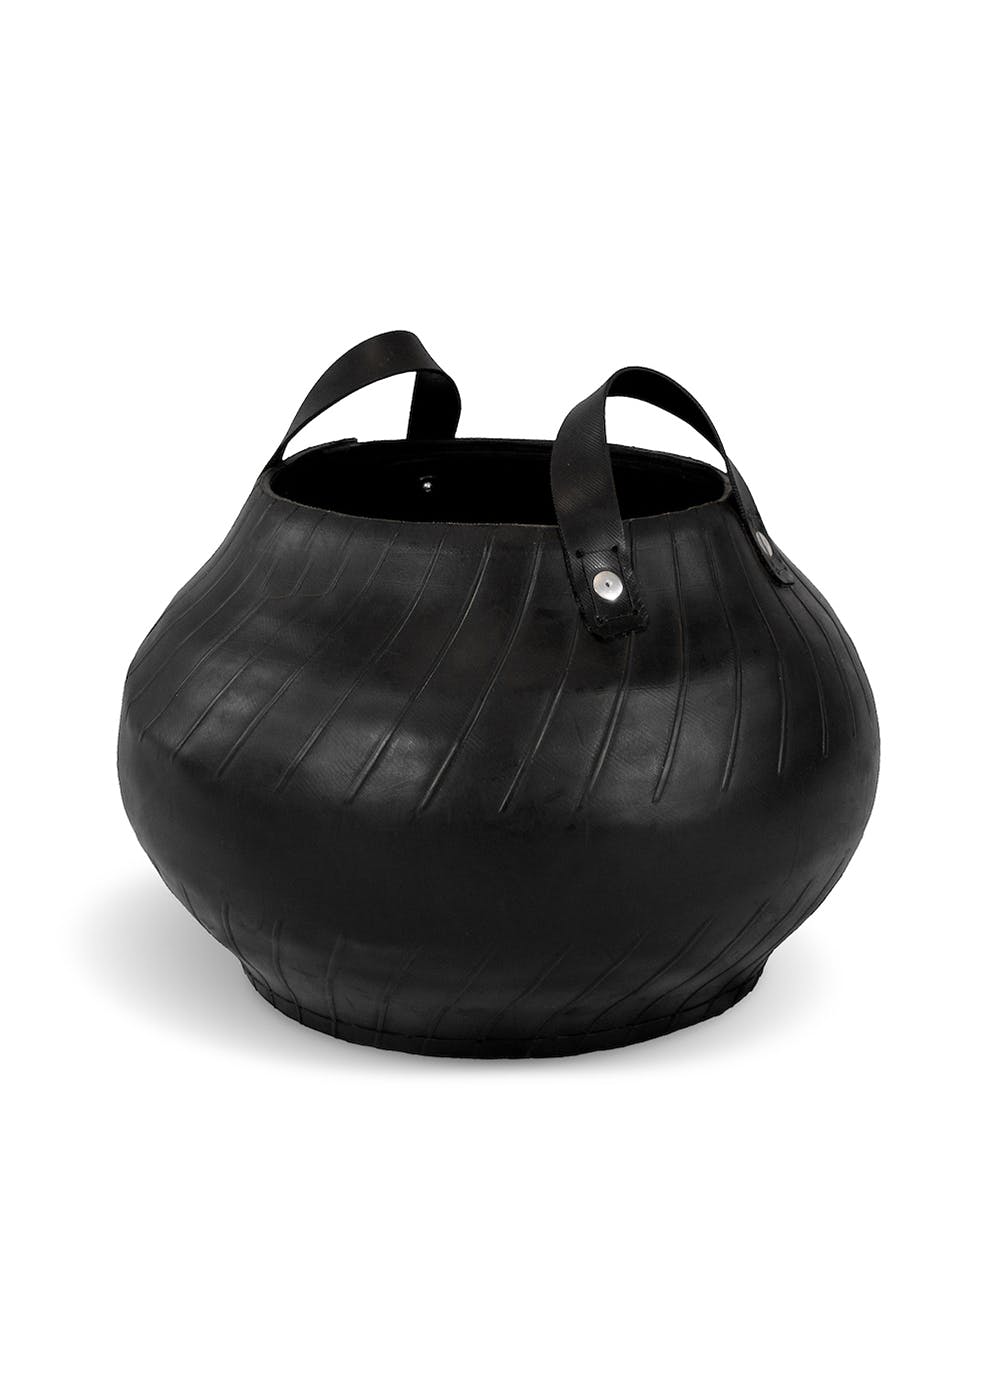 Unbreakable Matka Rubber Planter with Rubber Handle